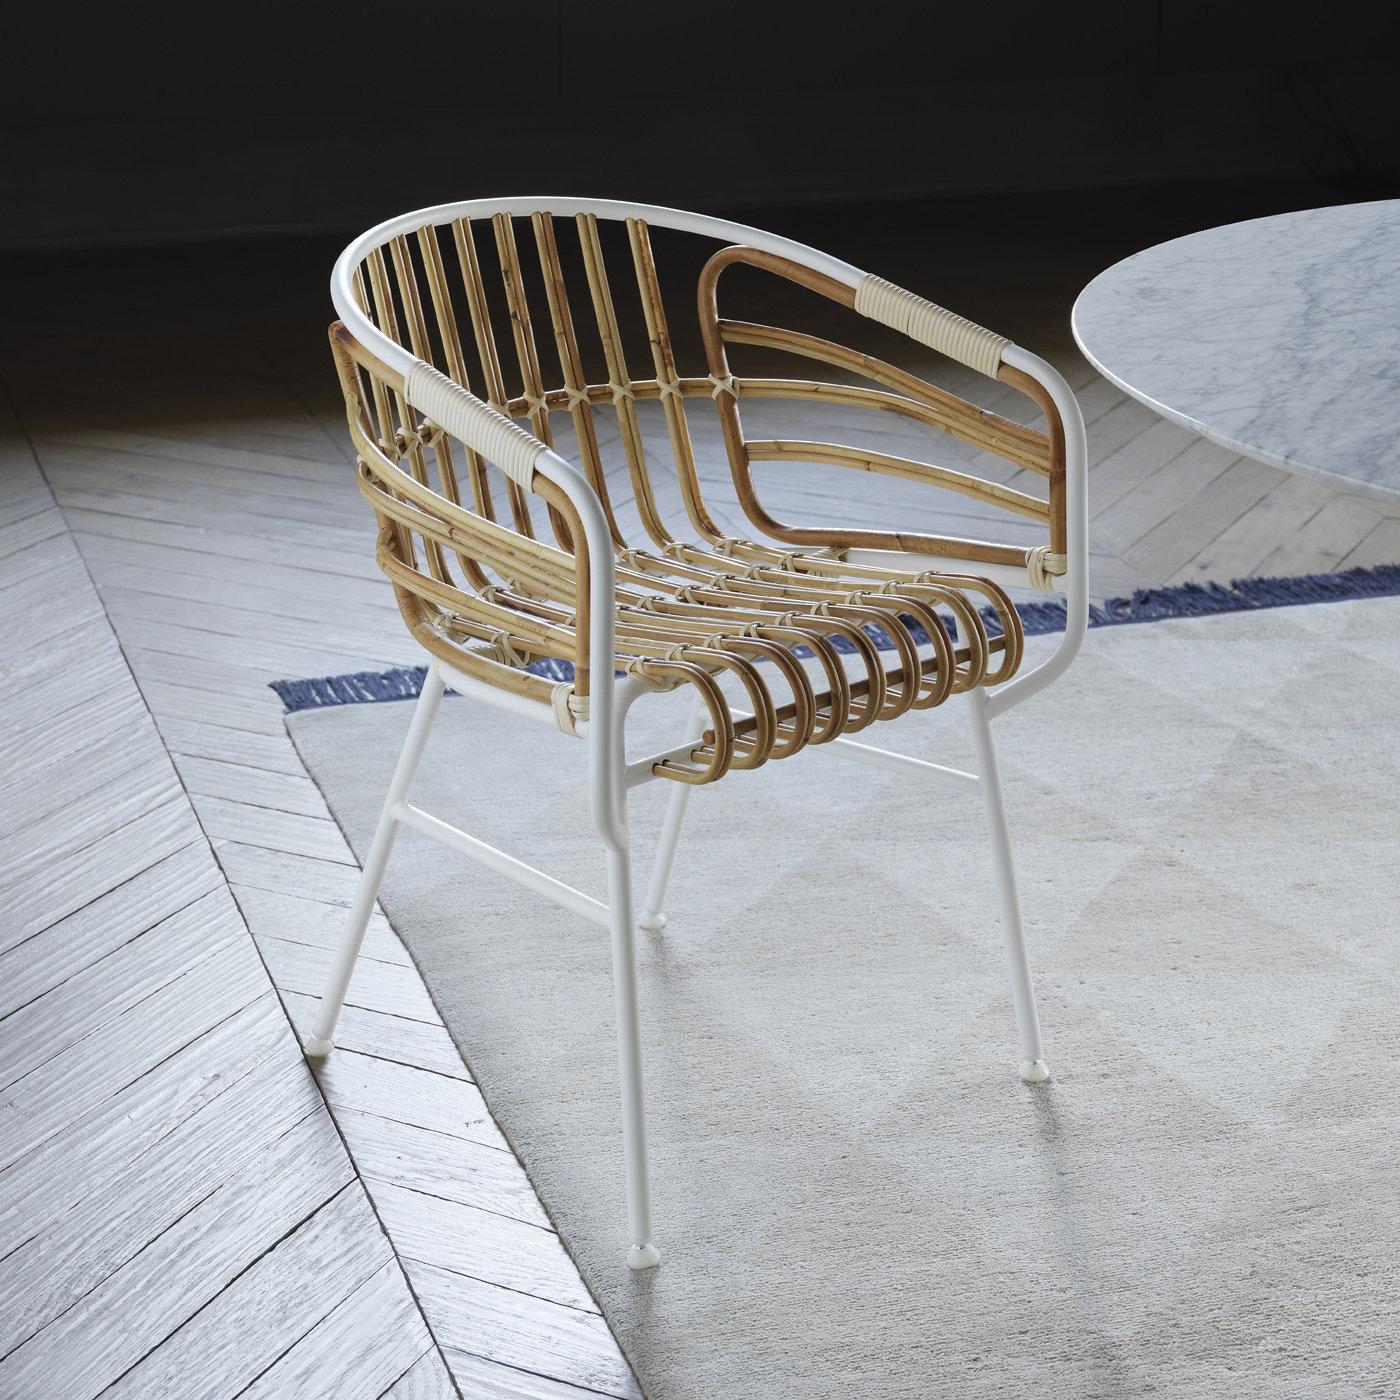 Suitable for both indoor and outdoor, this chair designed by Paolo Lucidi and Luca Pevere embodies the perfect balance of tradition and modernity. Paying homage to the century-old tradition and craftsmanship of the rattan weavers, this updated